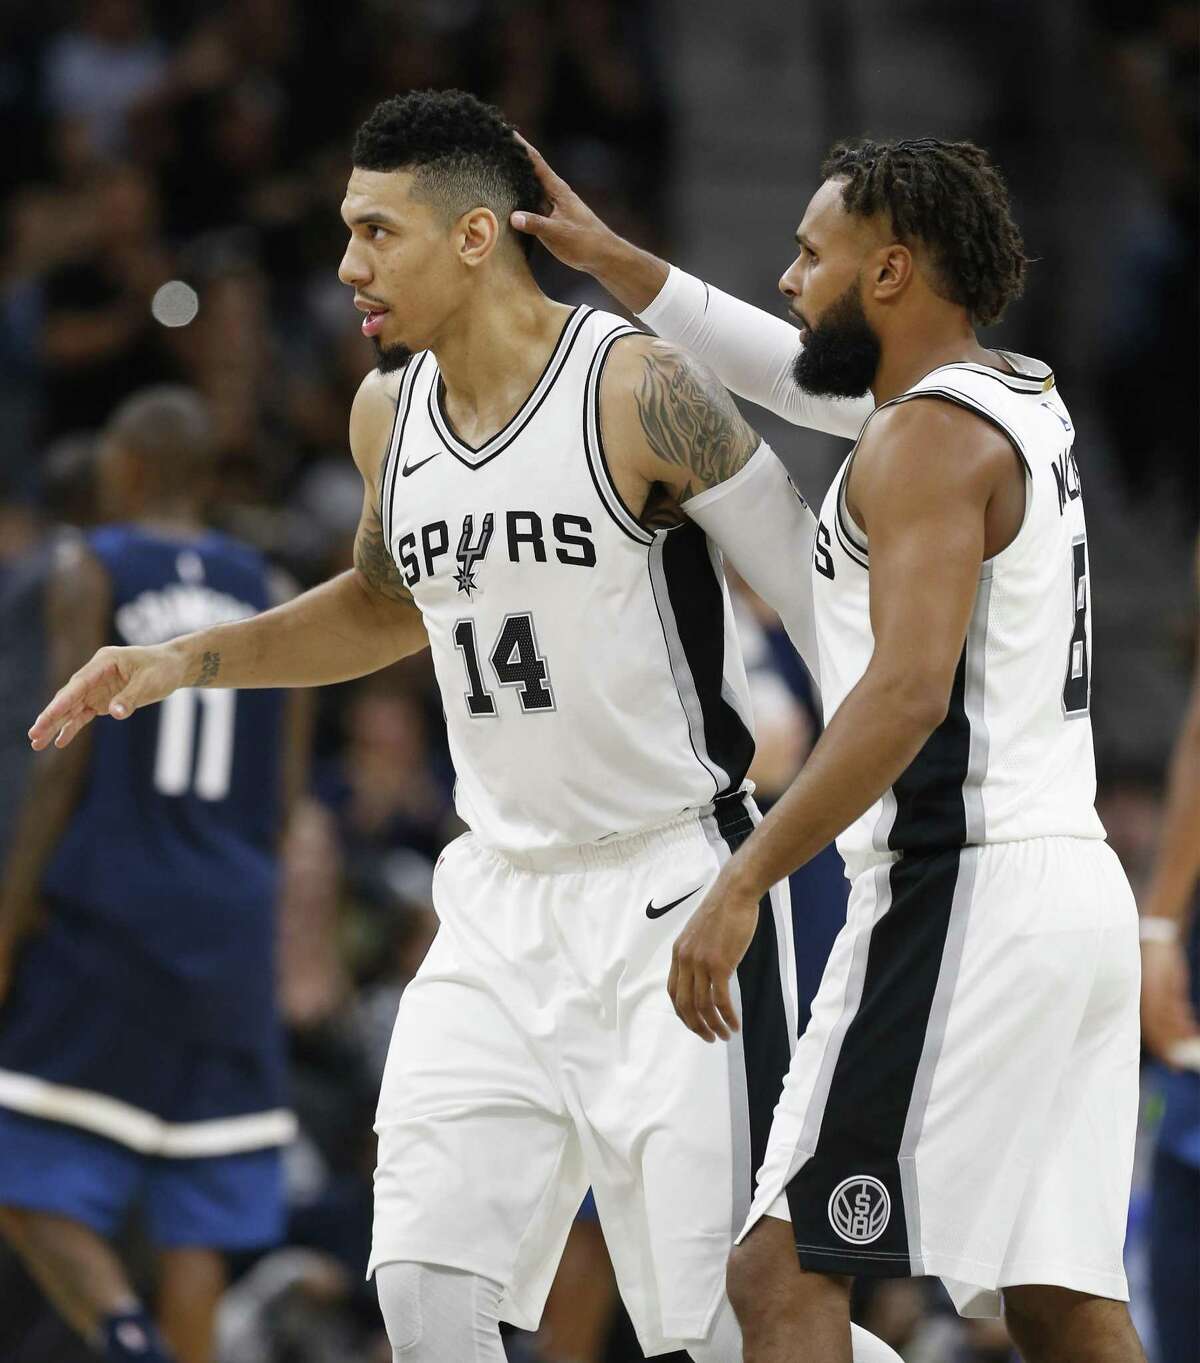 Spurs' Patty Mills (08) congratulates teammate Danny Green (14) after Green hit a three-pointer in the fourth against the Minnesota Timberwolves at the AT&T Center on Wednesday, Oct. 18, 2017. Spurs defeated the T'Wolves, 107-99. (Kin Man Hui/San Antonio Express-News)